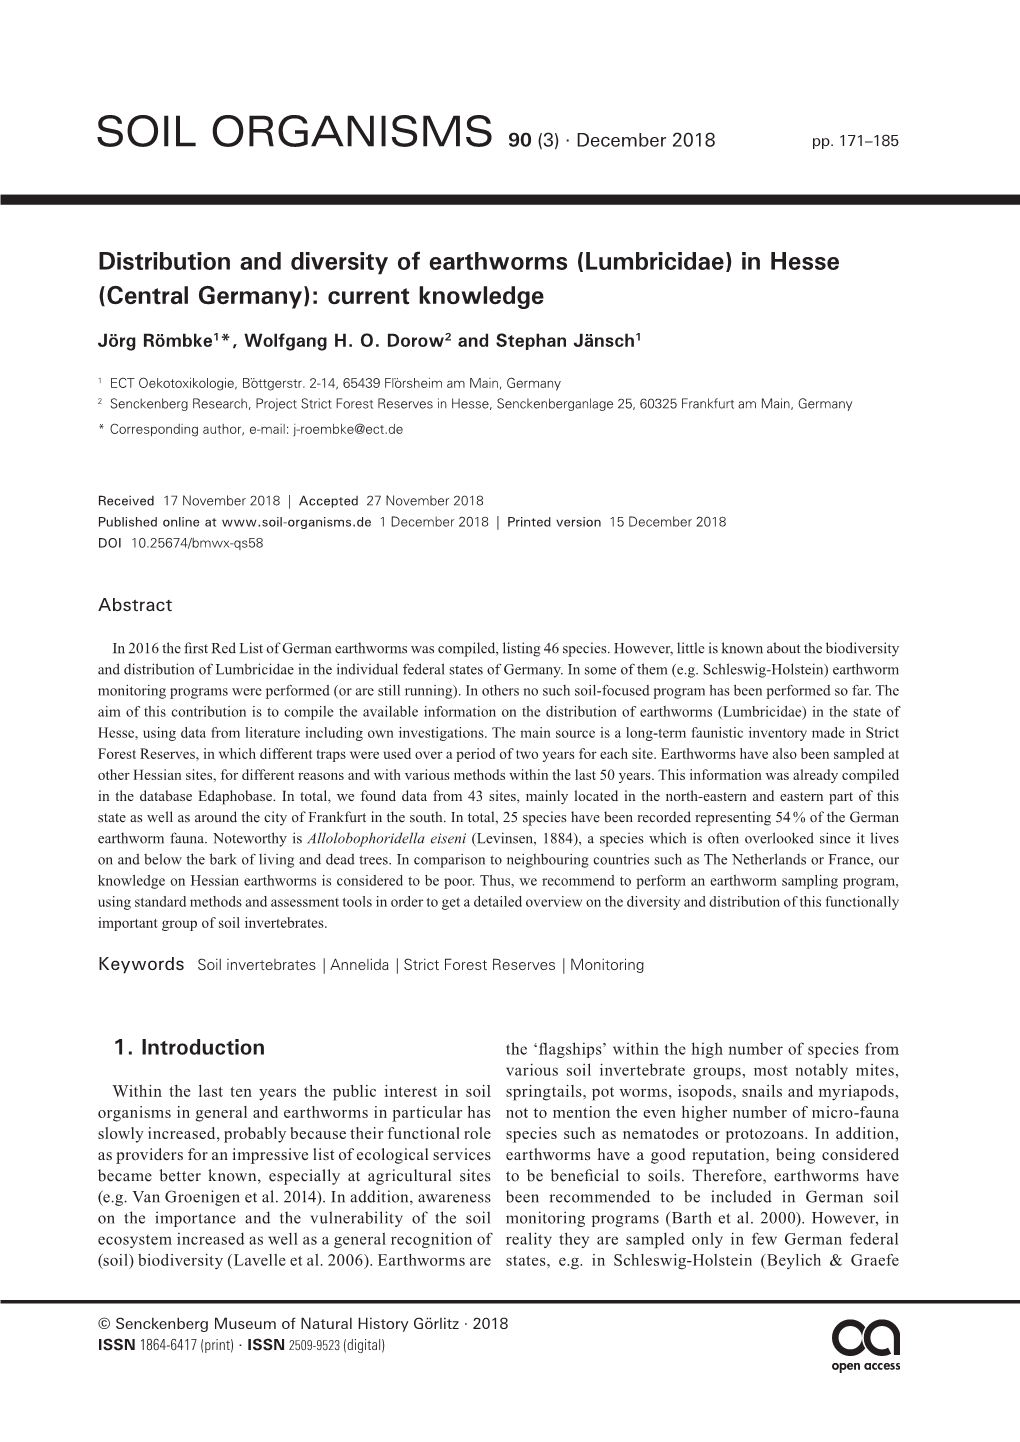 Distribution and Diversity of Earthworms (Lumbricidae) in Hesse (Central Germany): Current Knowledge